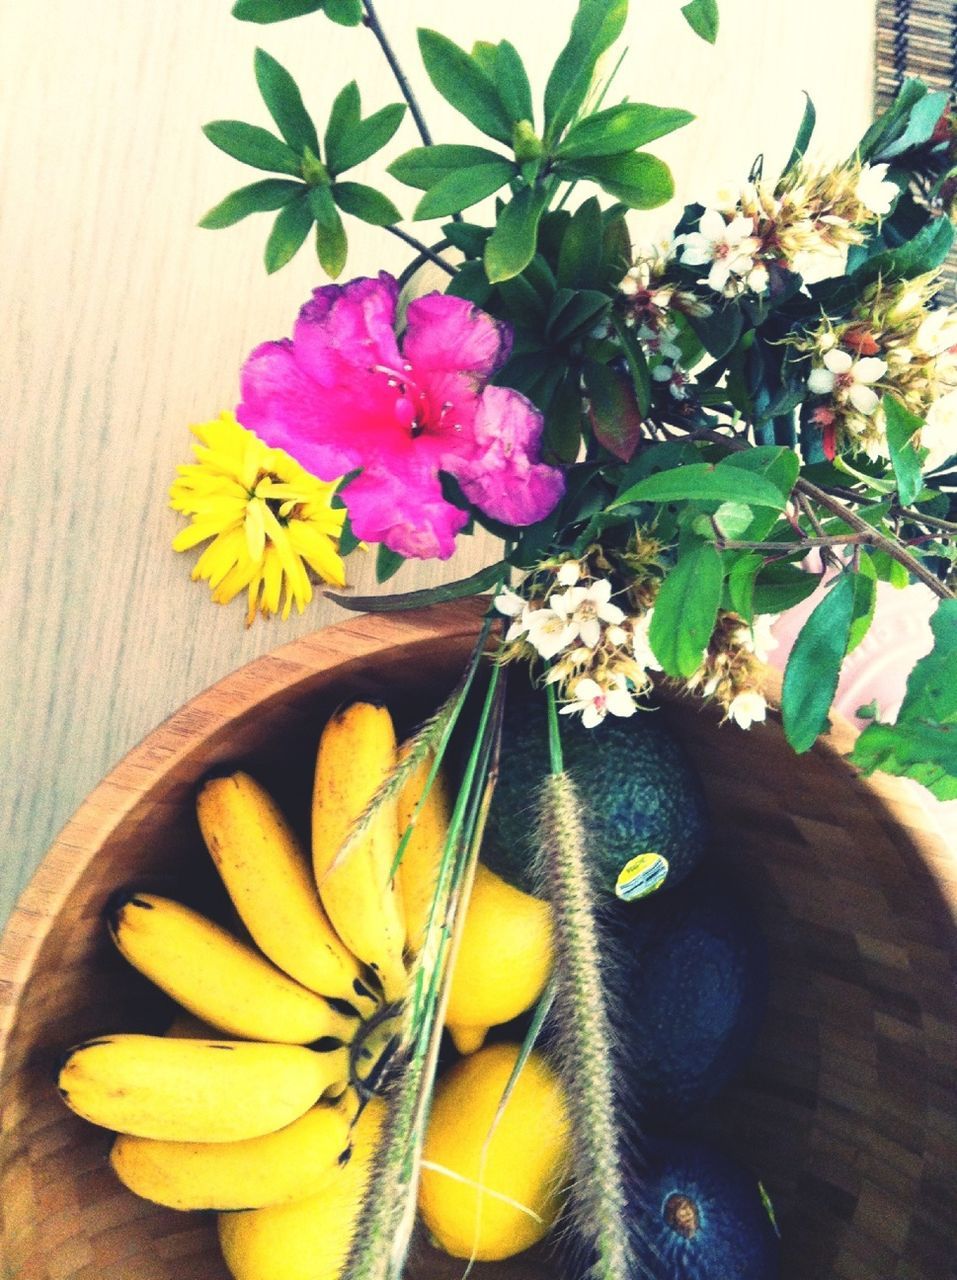 flower, freshness, yellow, table, high angle view, still life, indoors, fragility, wood - material, close-up, food, petal, food and drink, wooden, no people, leaf, vase, day, fruit, flower head